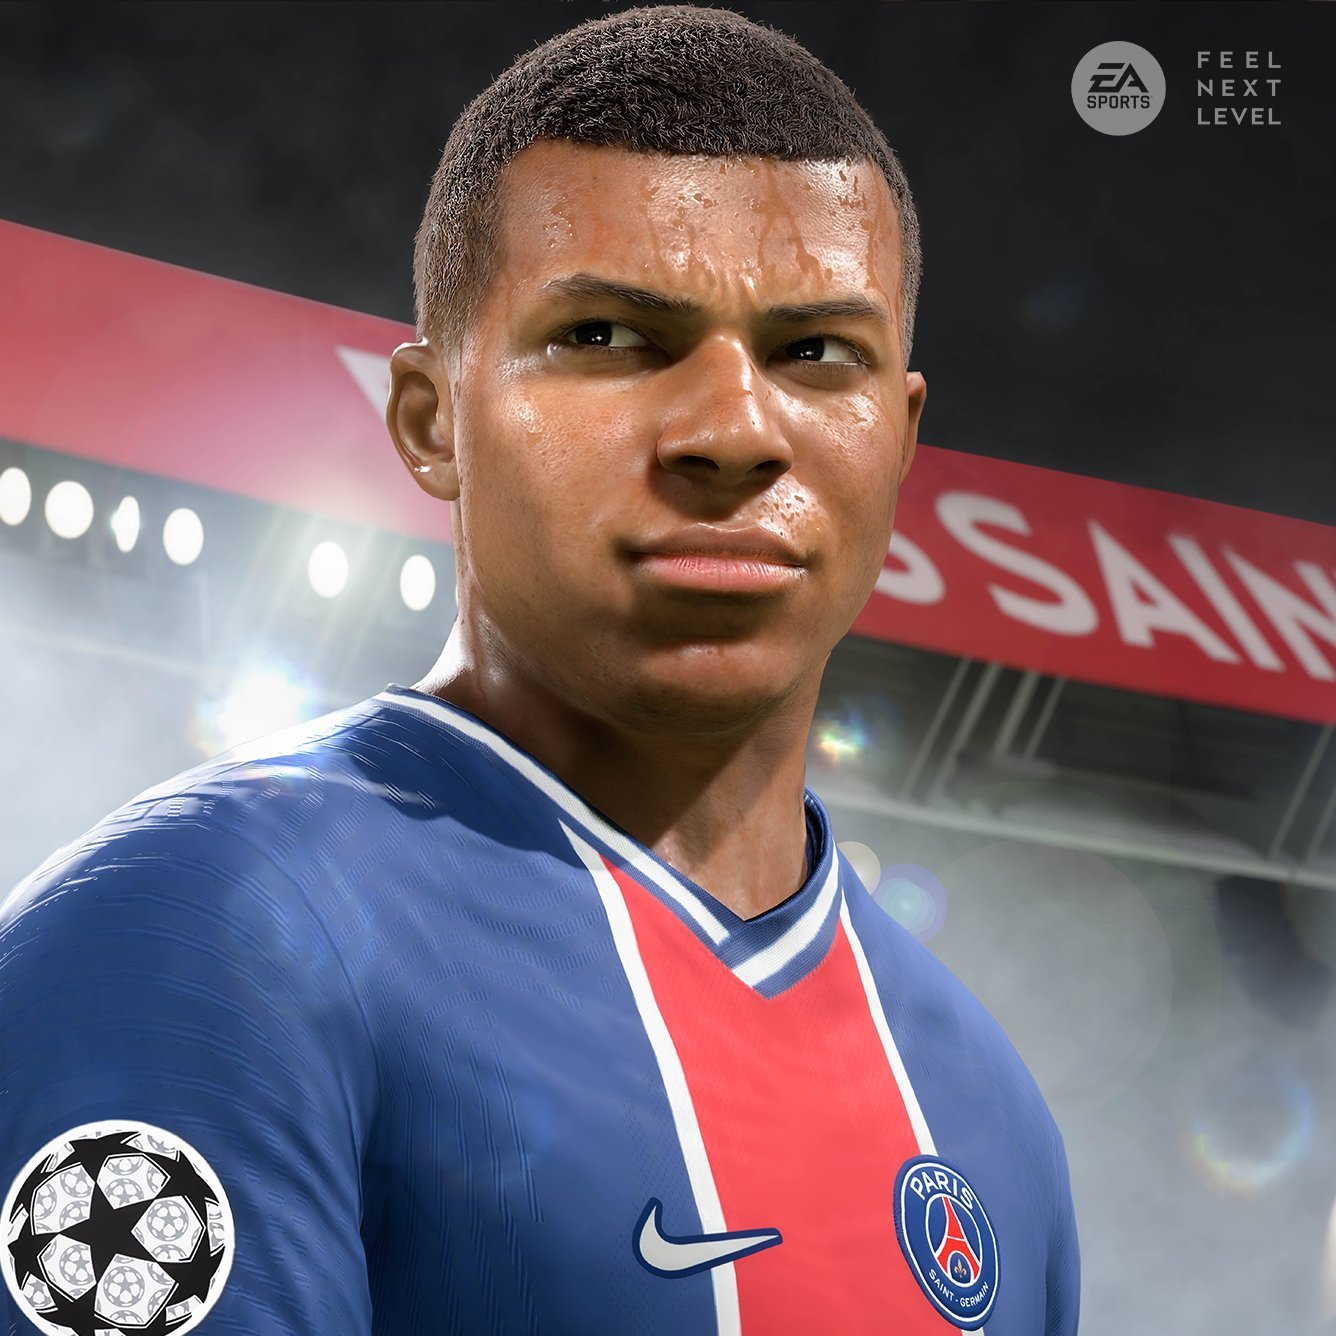 FIFA 21 On November 24 EA Sports will disclose the first details for